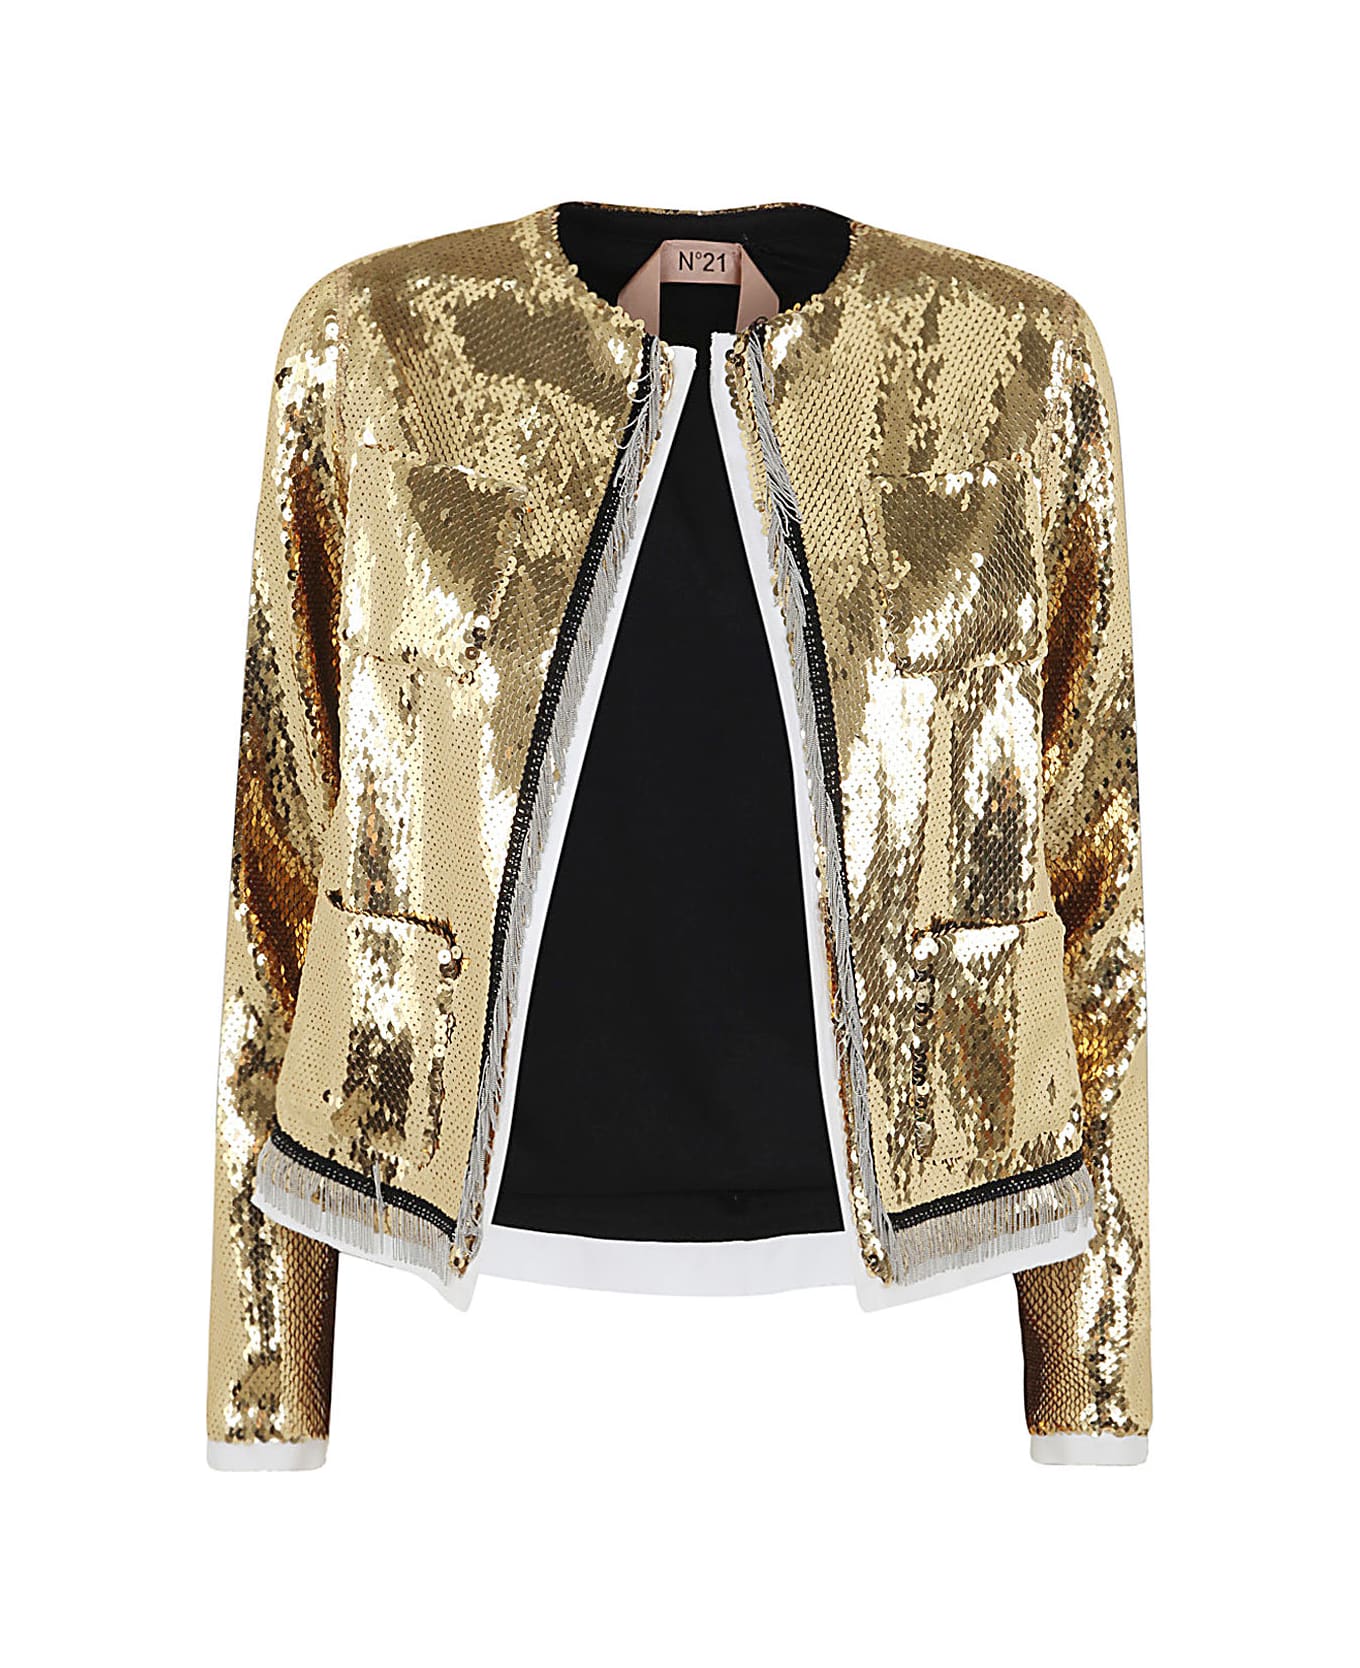 N.21 Jacket With Paillettes - Yellow Gold